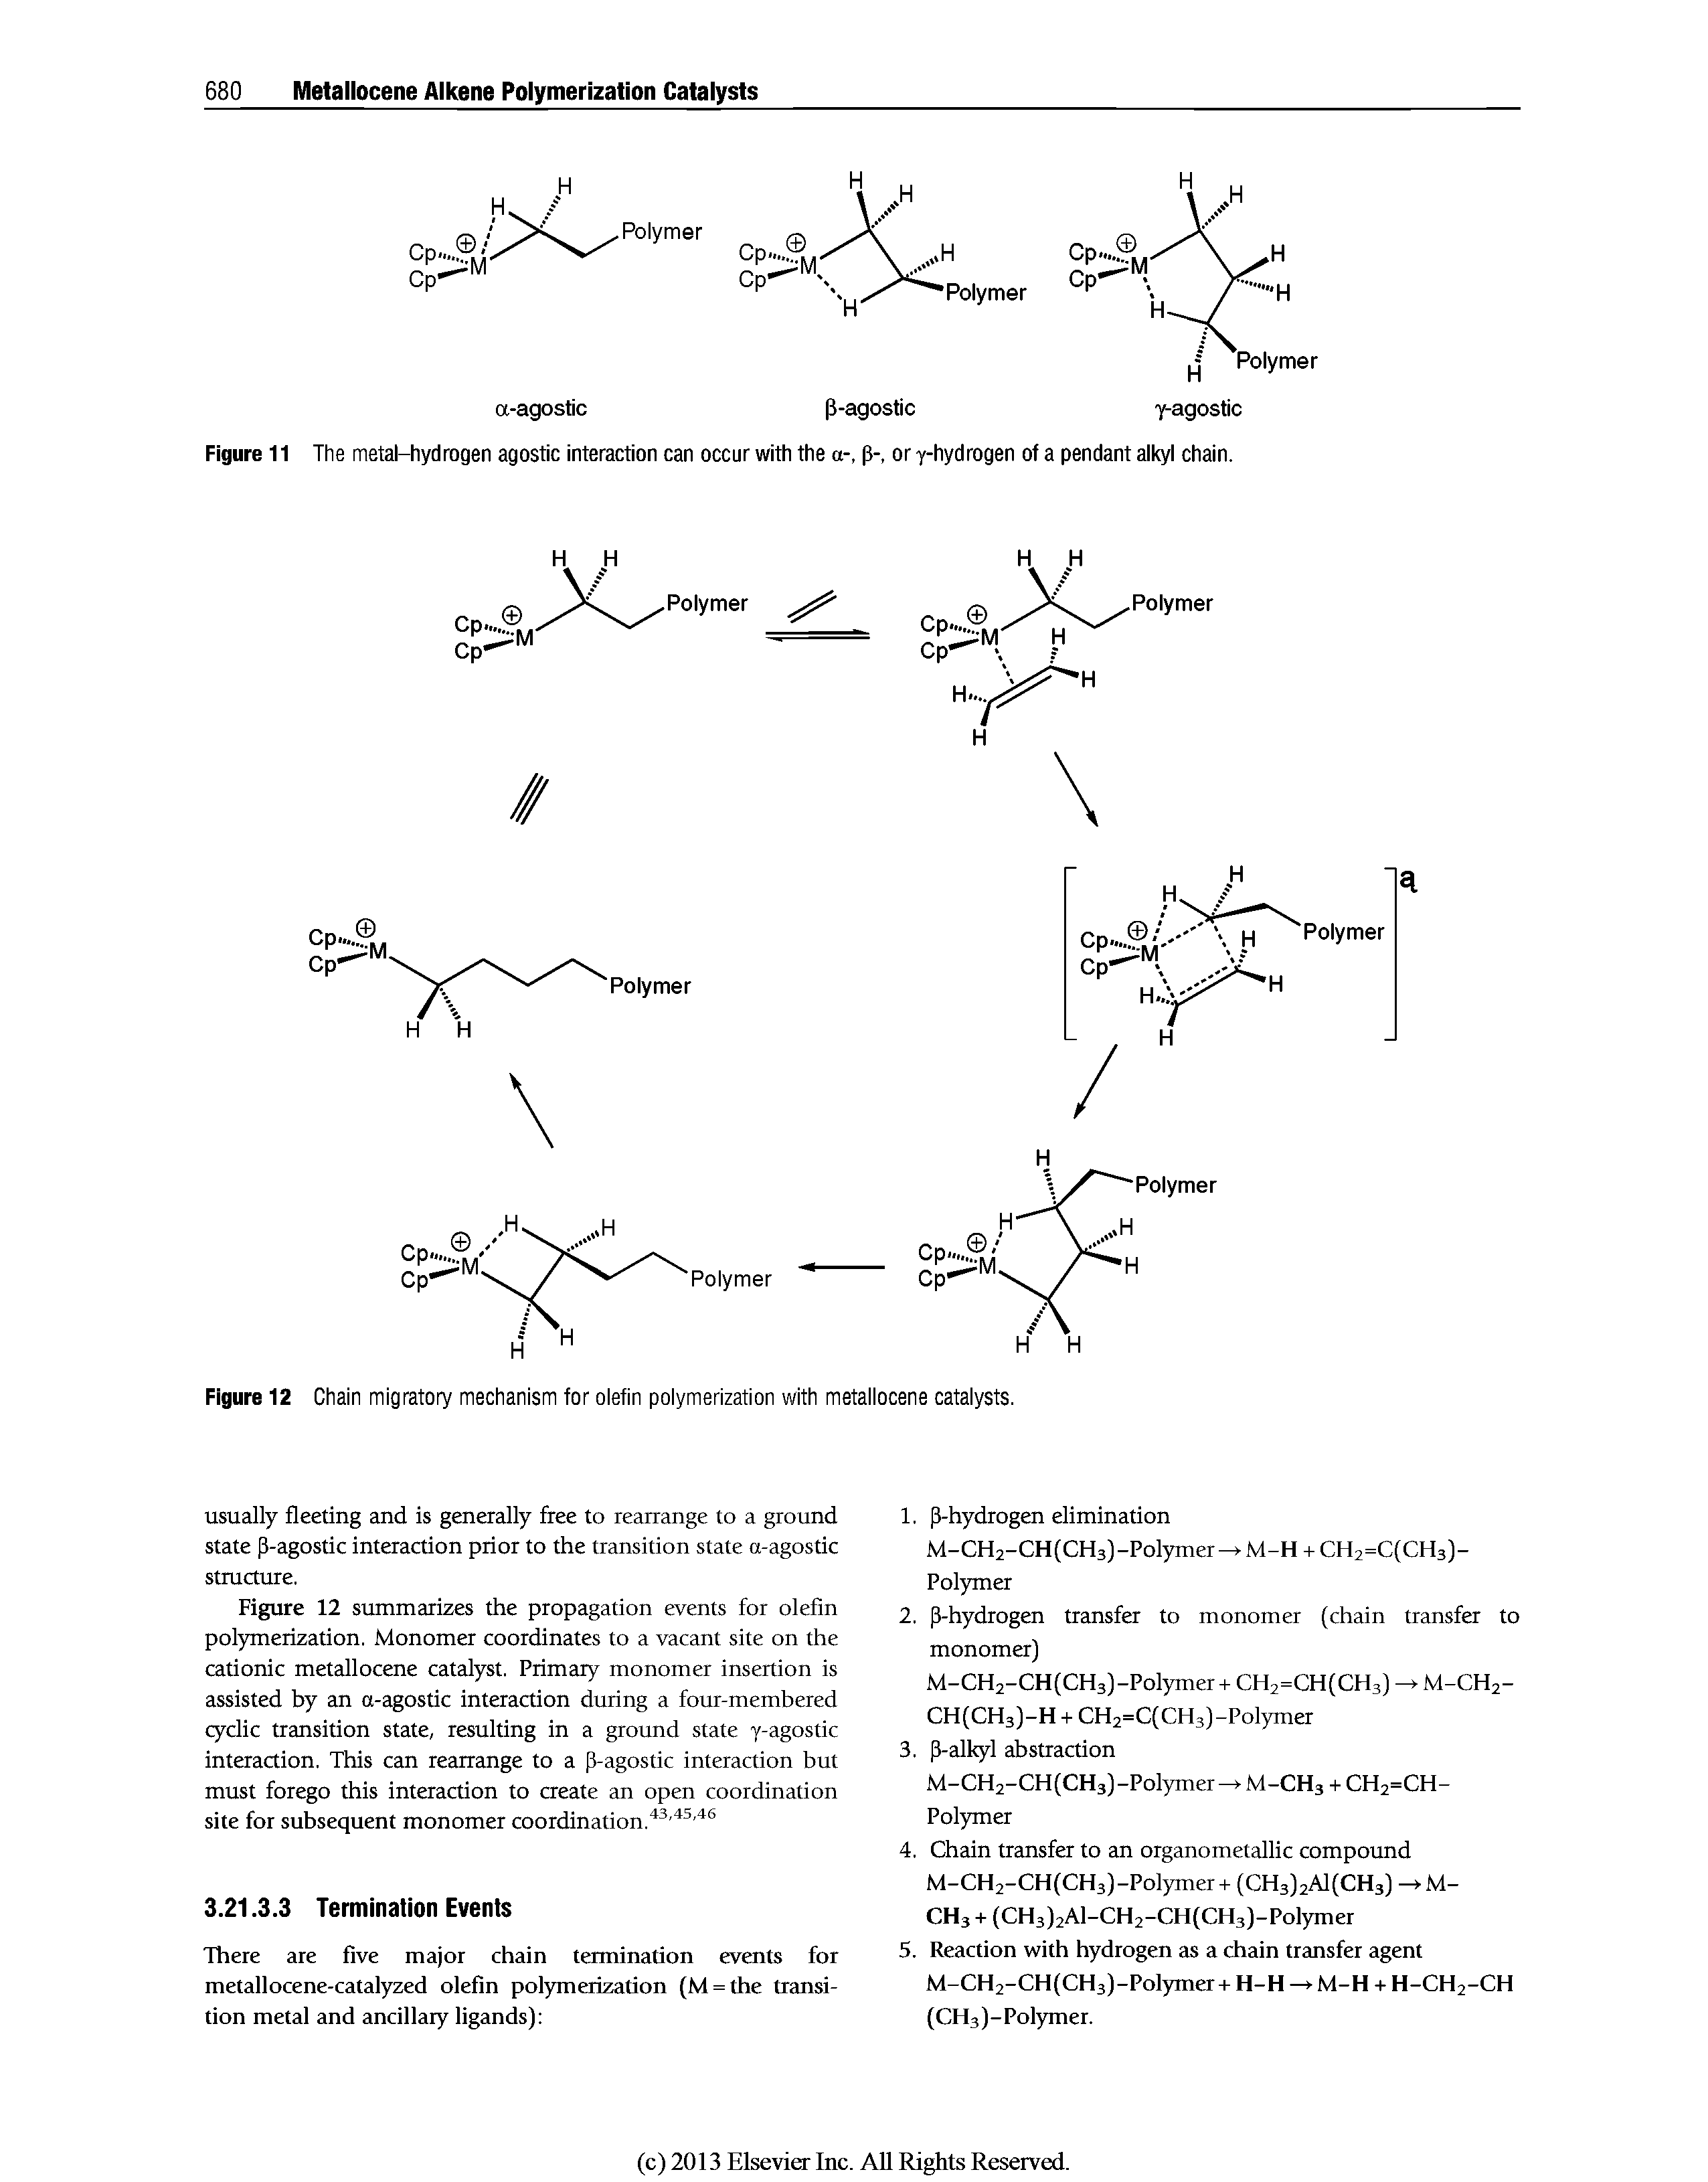 Figure 12 Chain migratory mechanism for olefin polymerization with metallocene catalysts.